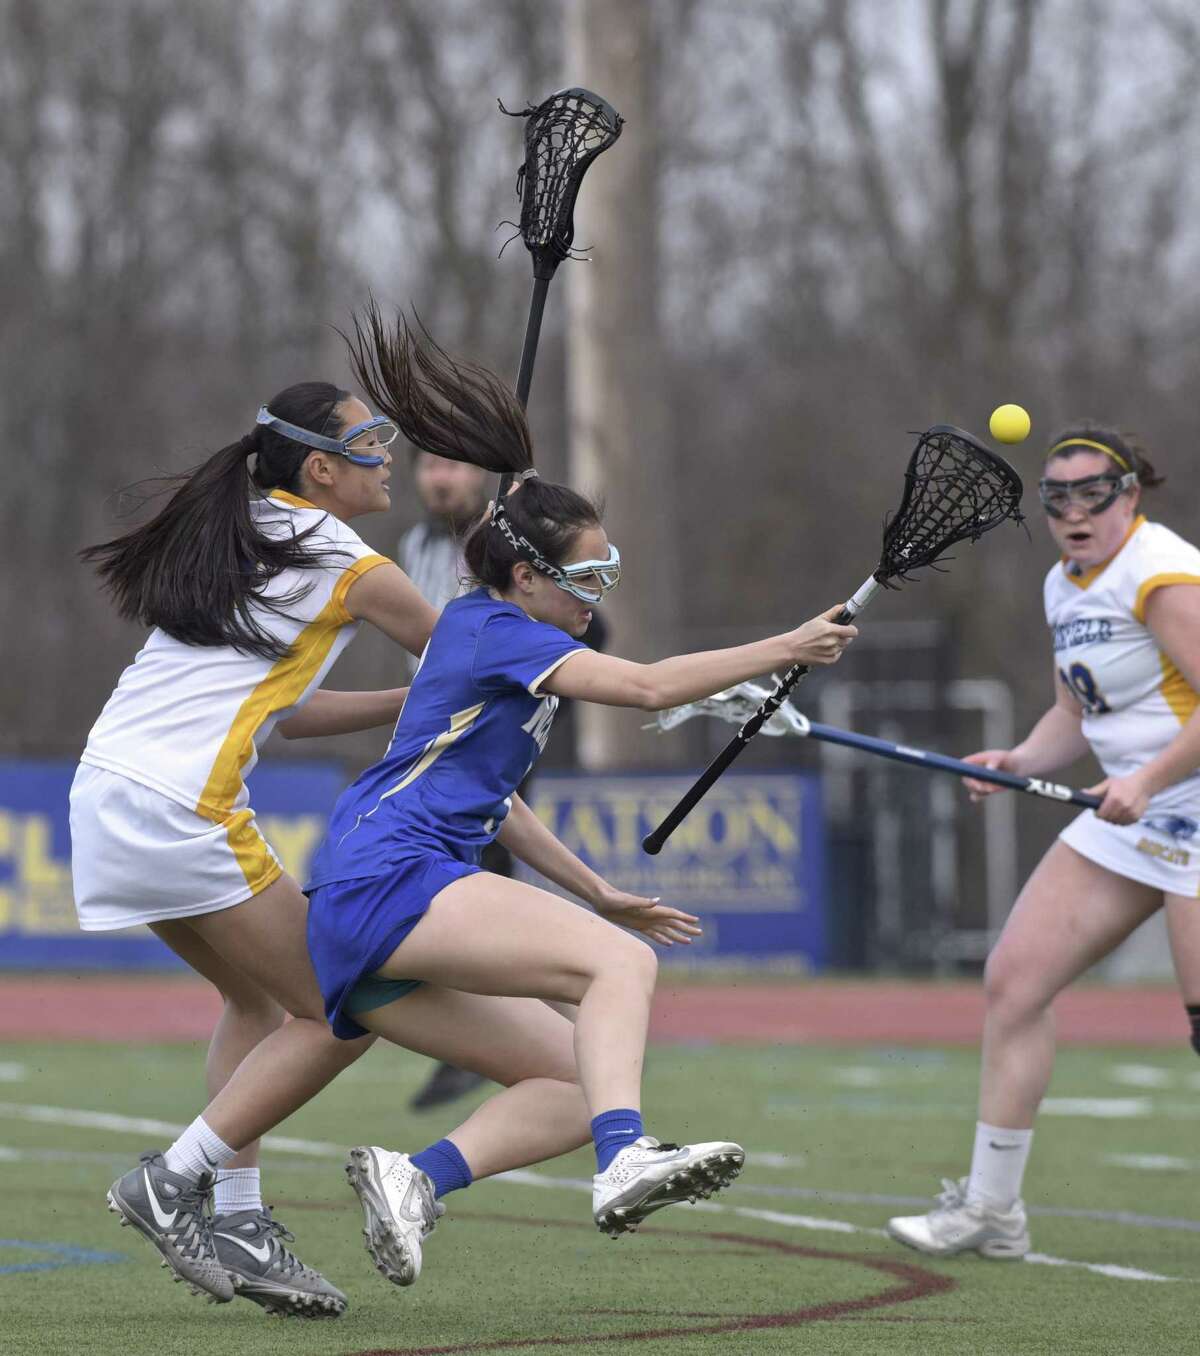 Newtown's Hana Rosenthal (3) and Brookfield's Eliza Lloyd (9) collide in the girls lacrosse game between Newtown and Brookfield high schools, Thursday afternoon, April 12, 2018, at Brookfield High School, in Brookfield, Conn.